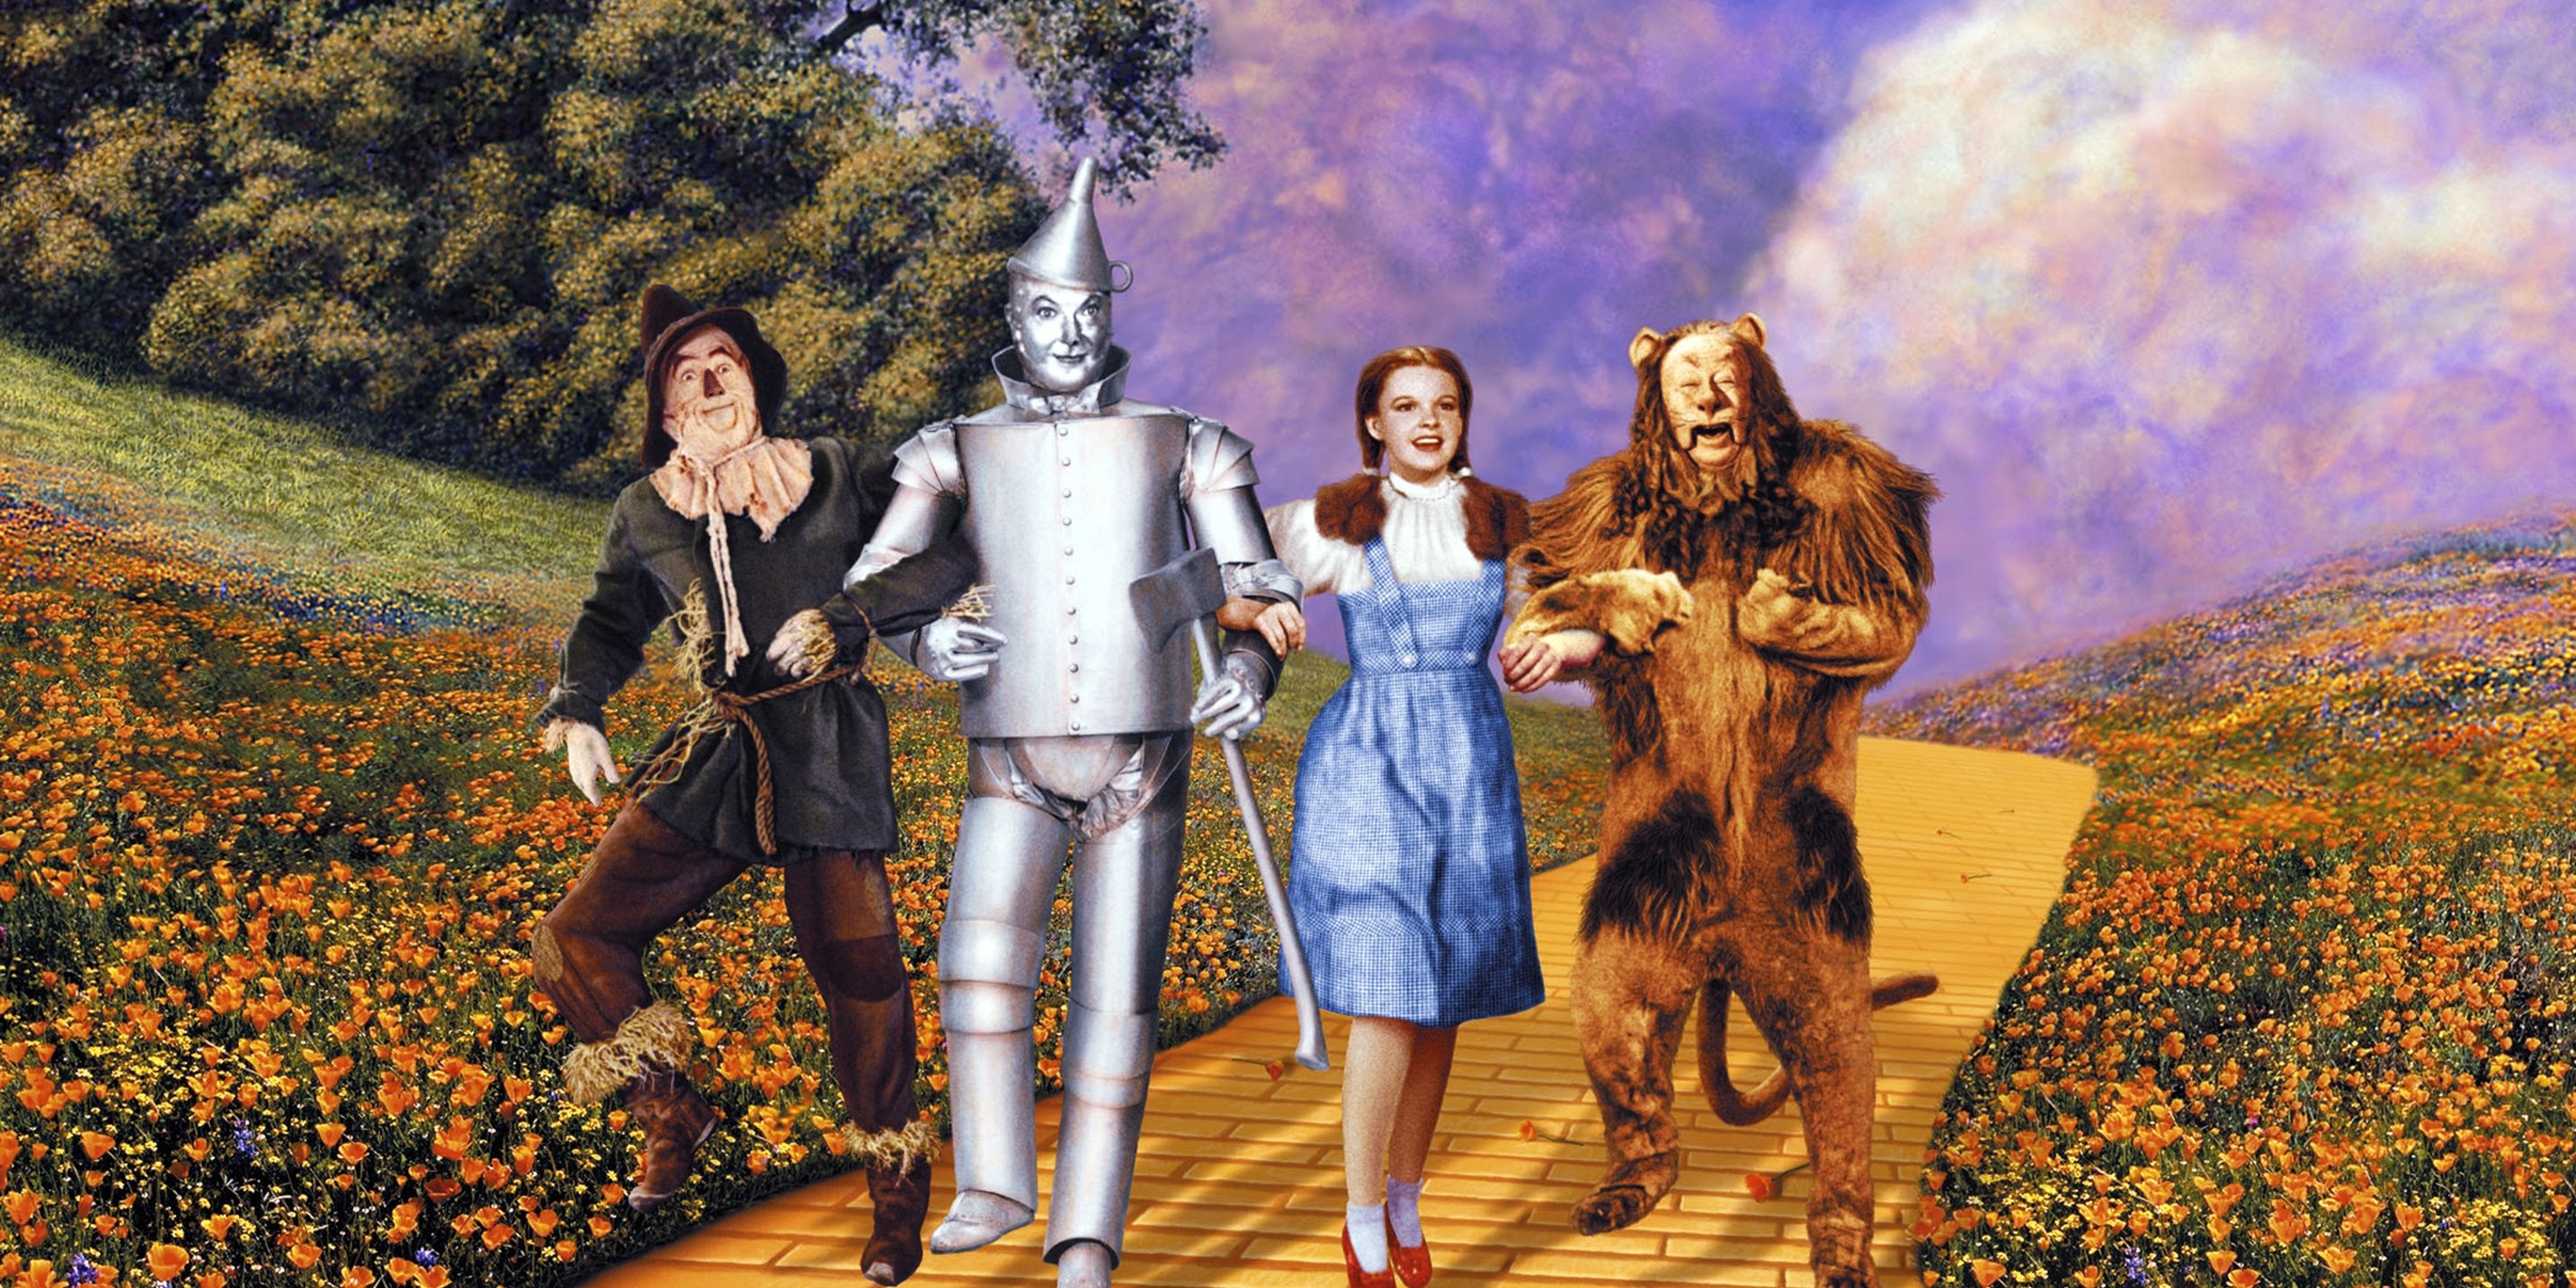 Dorothy with the Scarecrow, Tin Man, and the Cowardly Lion in The Wizard of Oz (1939)